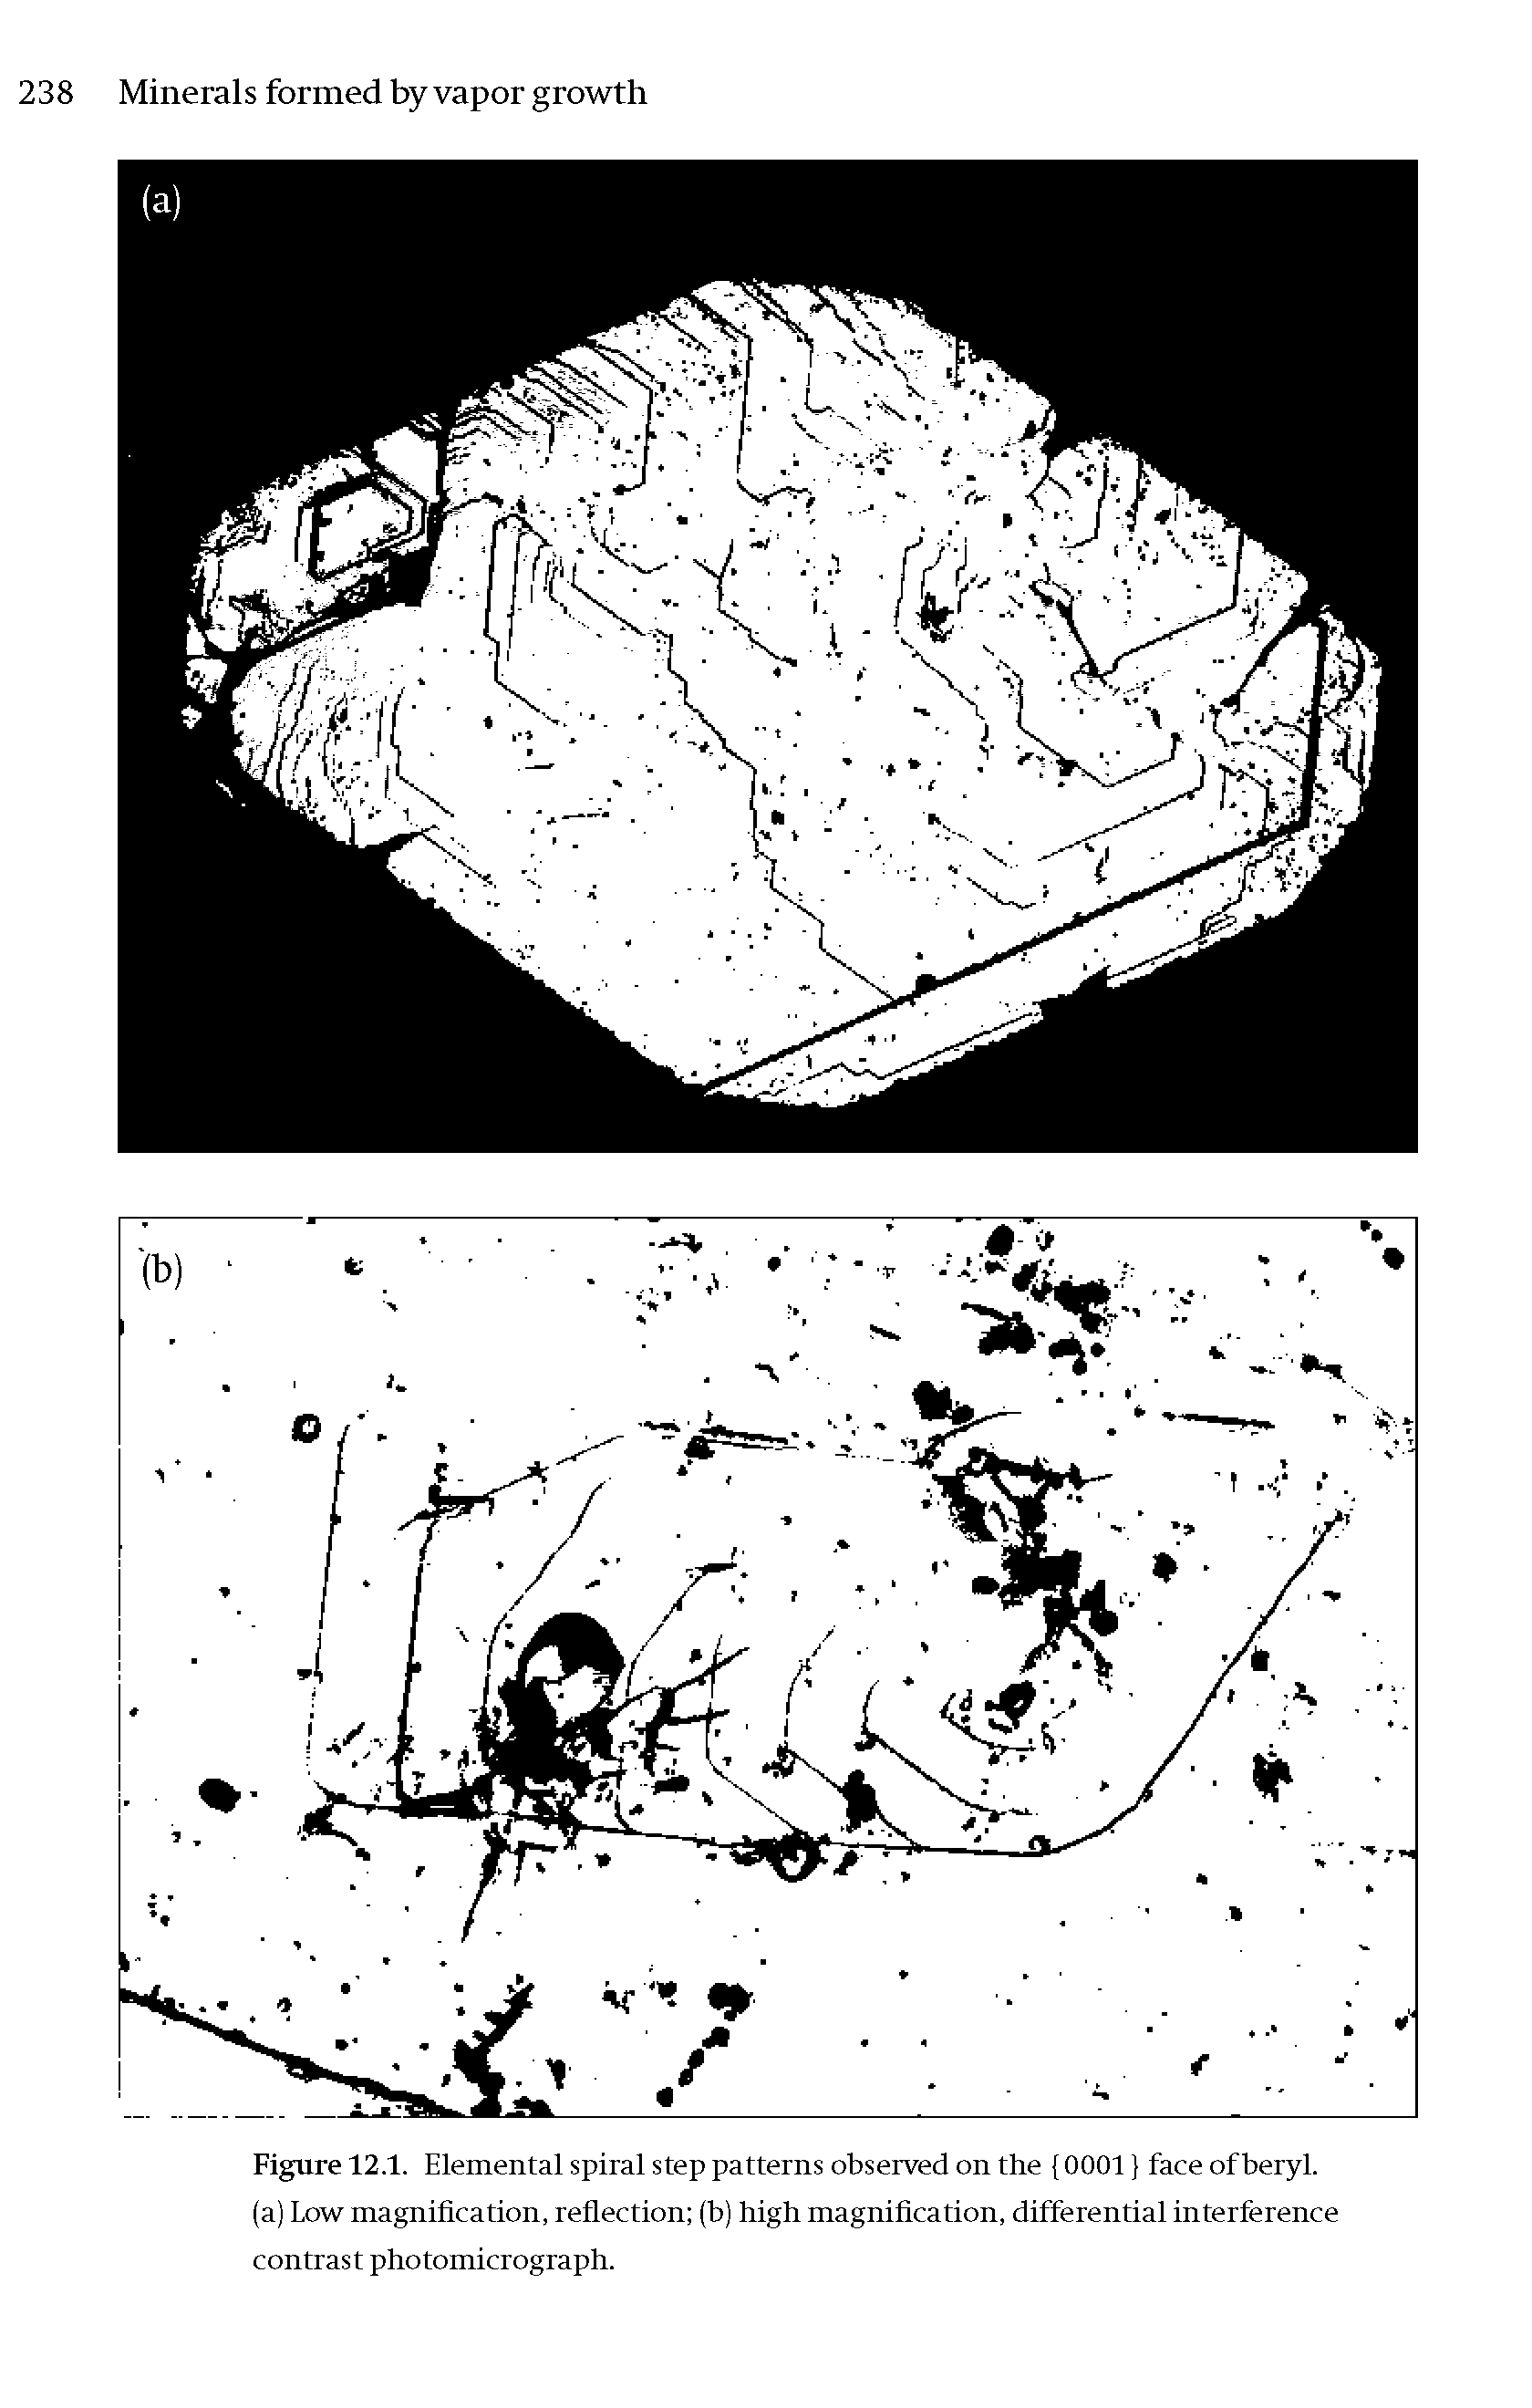 Figure 12.1. Elemental spiral step patterns observed on the 0001 face of beryl, (a) Low magnification, reflection (b) high magnification, differential interference contrast photomicrograph.